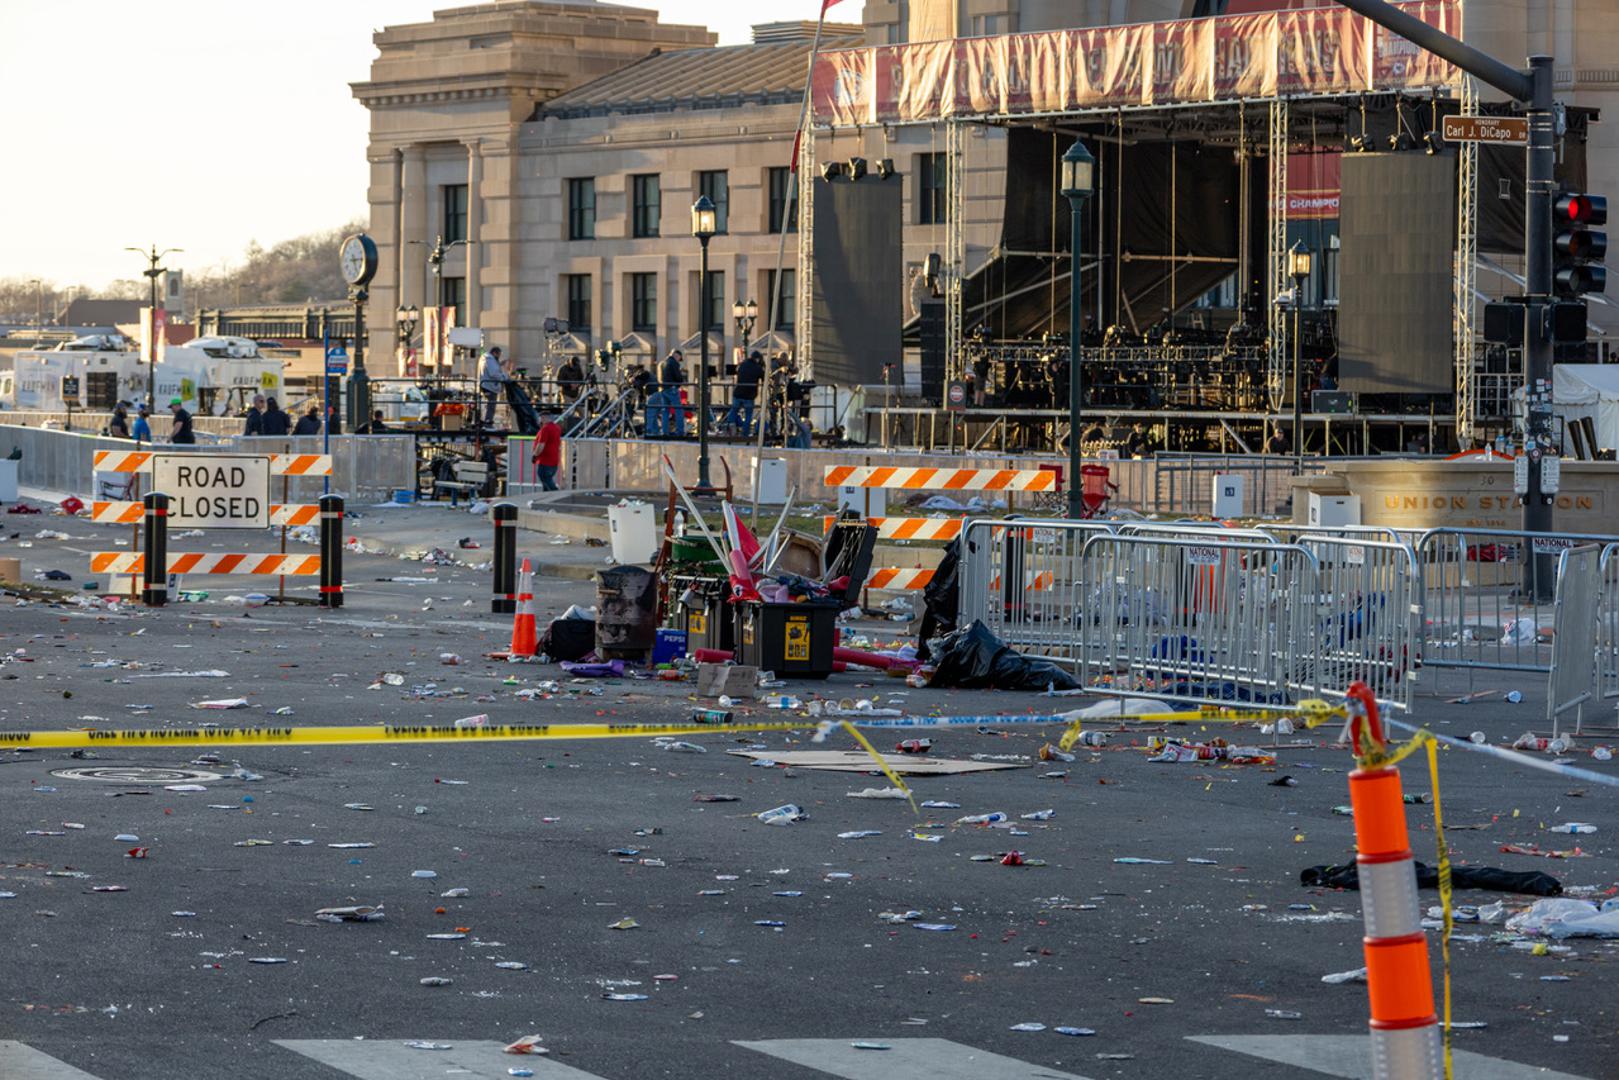 (240215) -- KANSAS CITY, Feb. 15, 2024 (Xinhua) -- This photo taken on Feb. 14, 2024 shows the site following a shooting in Kansas City, Missouri, the United States. At least one person was killed and 22 were injured as gunfire erupted during the Kansas City Chiefs' Super Bowl victory parade in Kansas City, U.S. state of Missouri, Stacey Graves, chief of the Kansas City Missouri Police Department, said at a news conference on Wednesday afternoon. (Photo by Robert Reed/Xinhua) Photo: Robert Reed/XINHUA